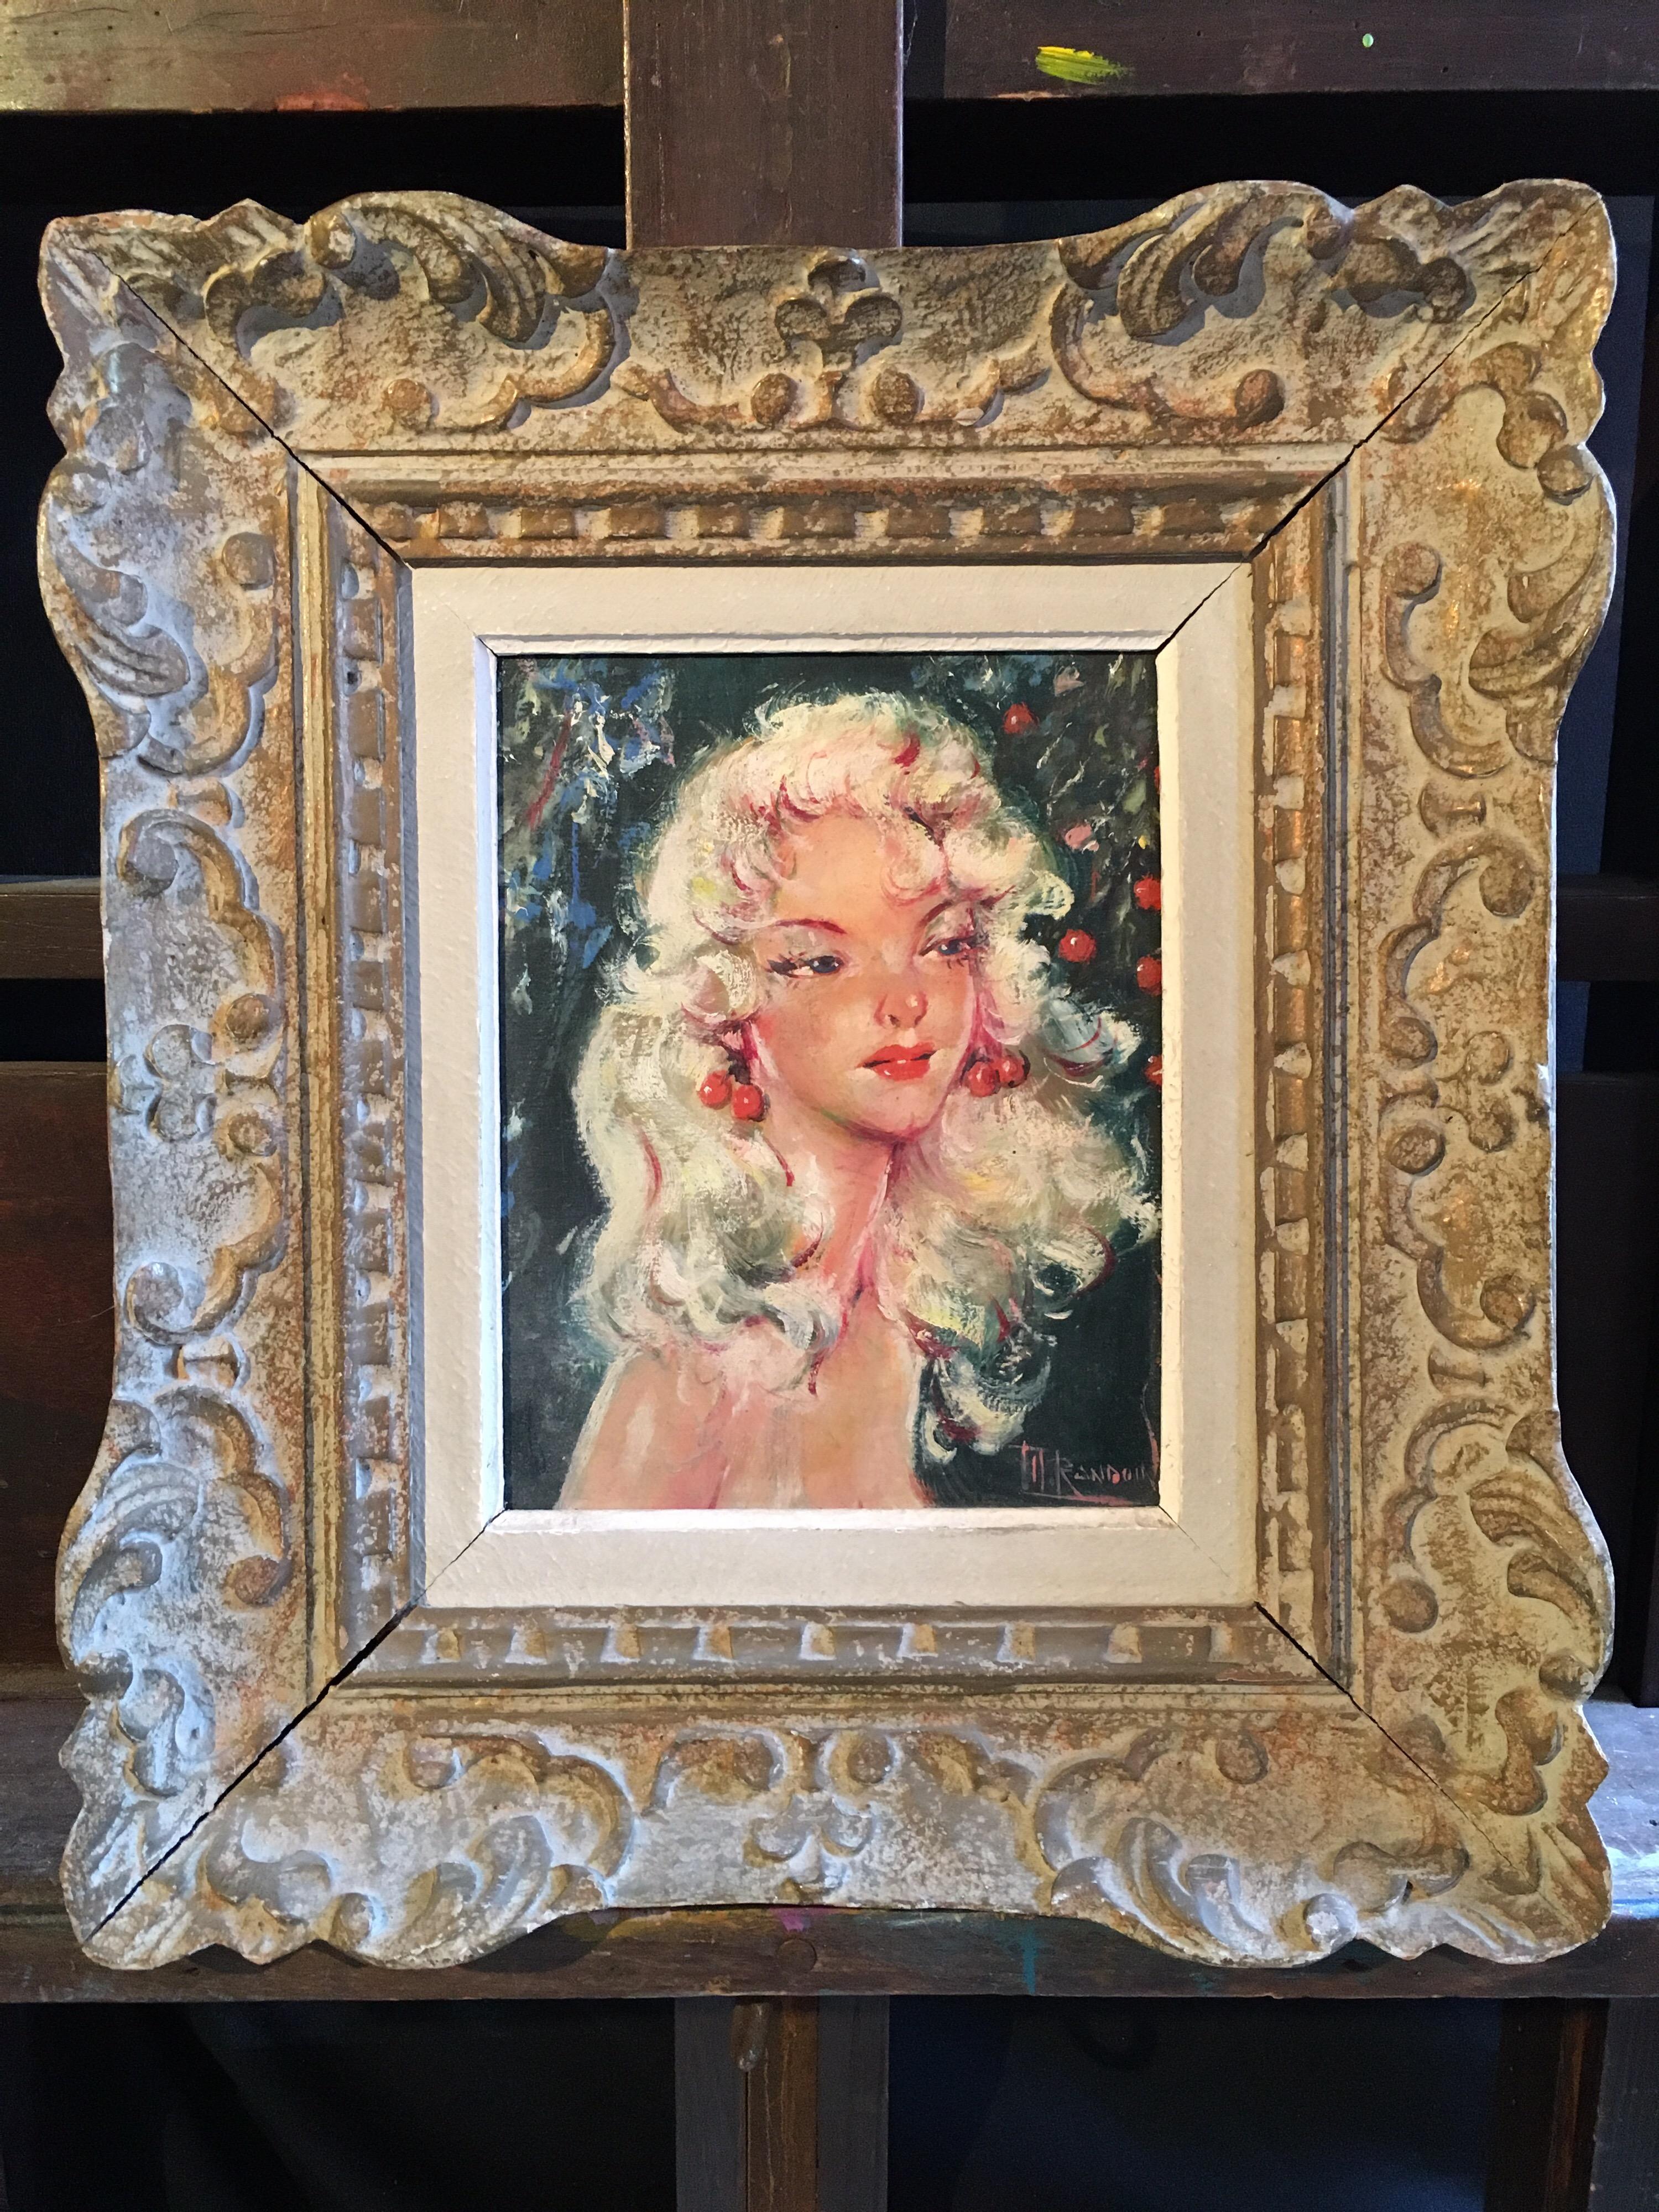 Mid 20th Century French Portrait in Kitsch Style, Parisian Belle, Signed Oil  - Painting by TH. Randoin